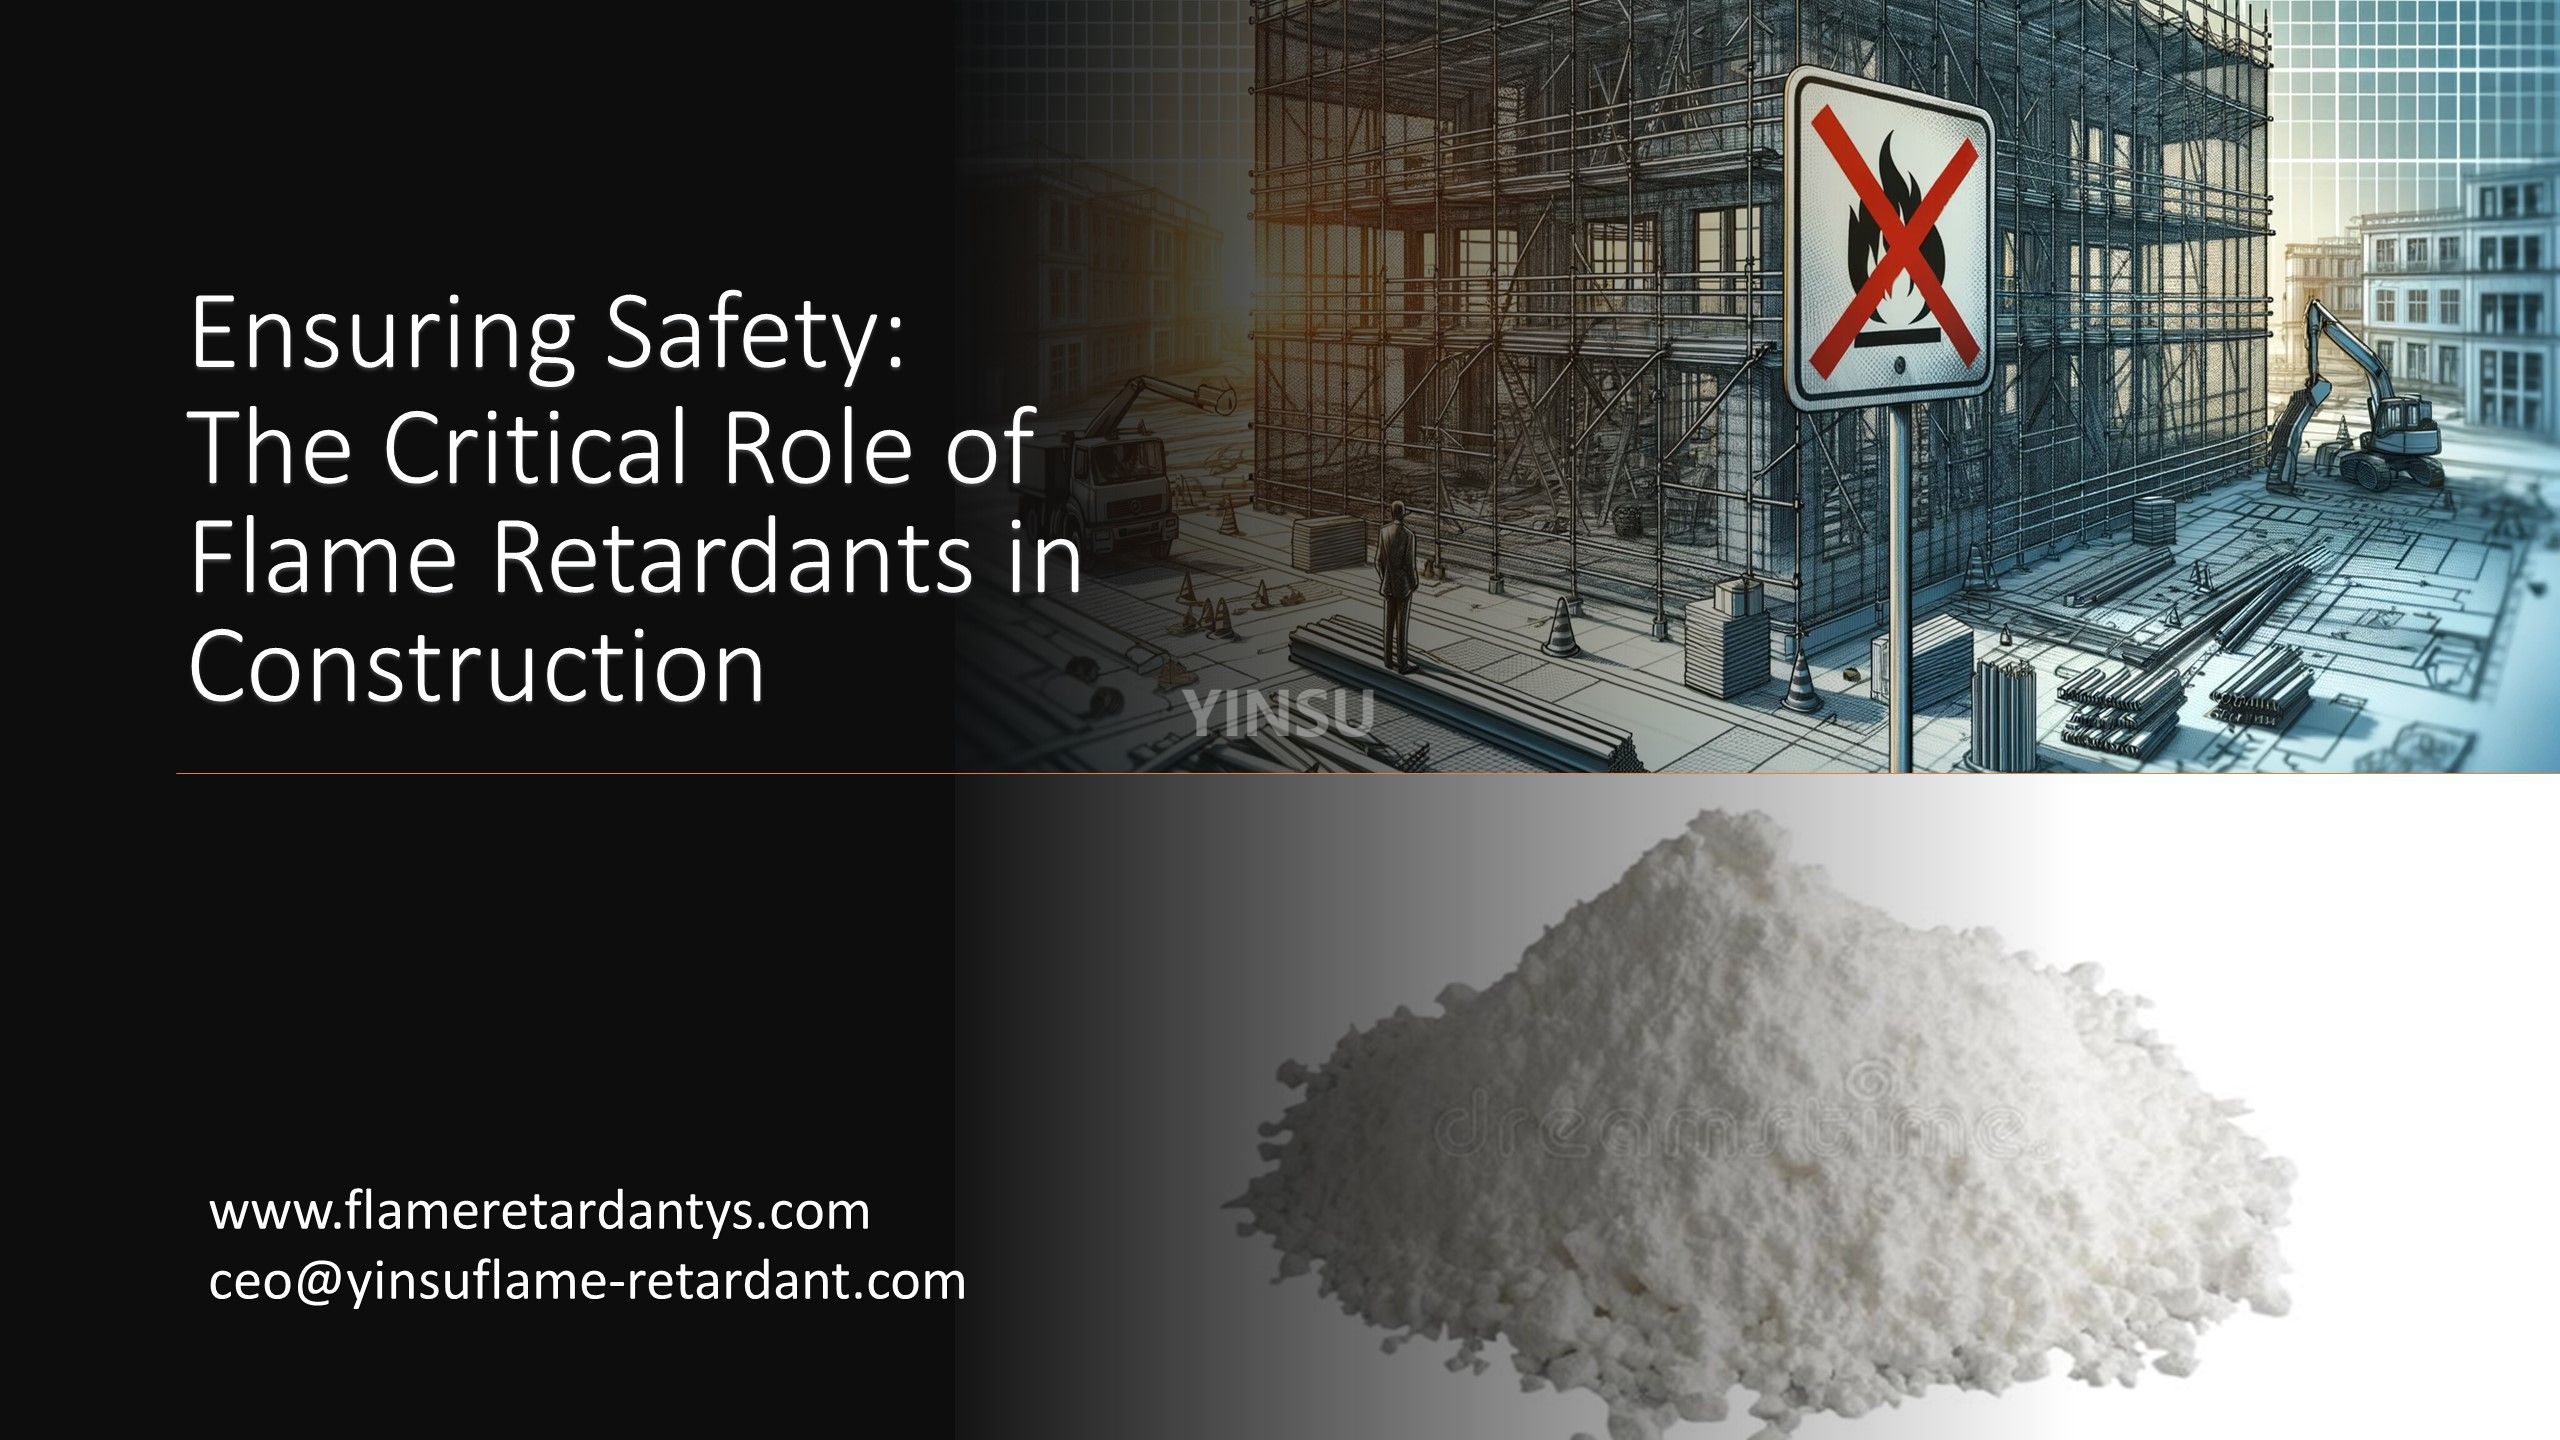 Ensuring Safety The Critical Role of Flame Retardants in Construction